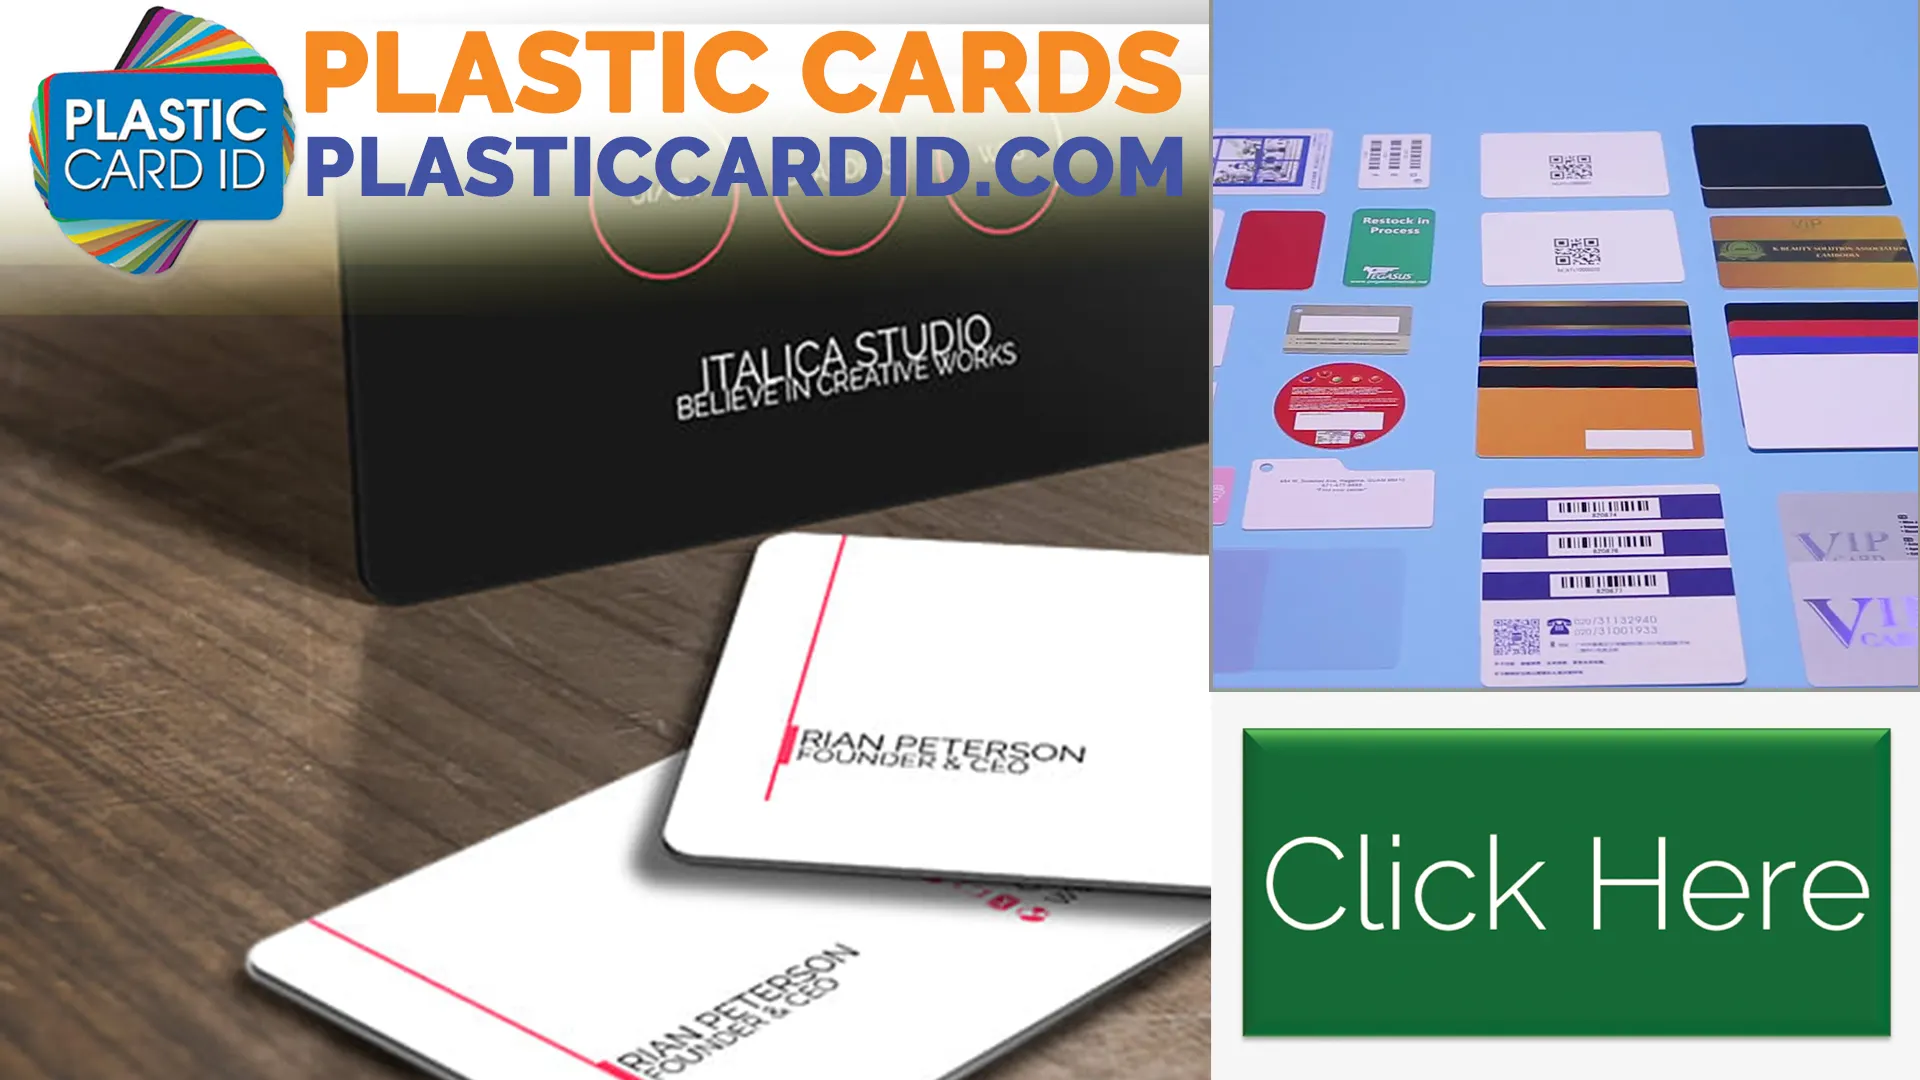 Making the Most of Your Plastic Card Printer